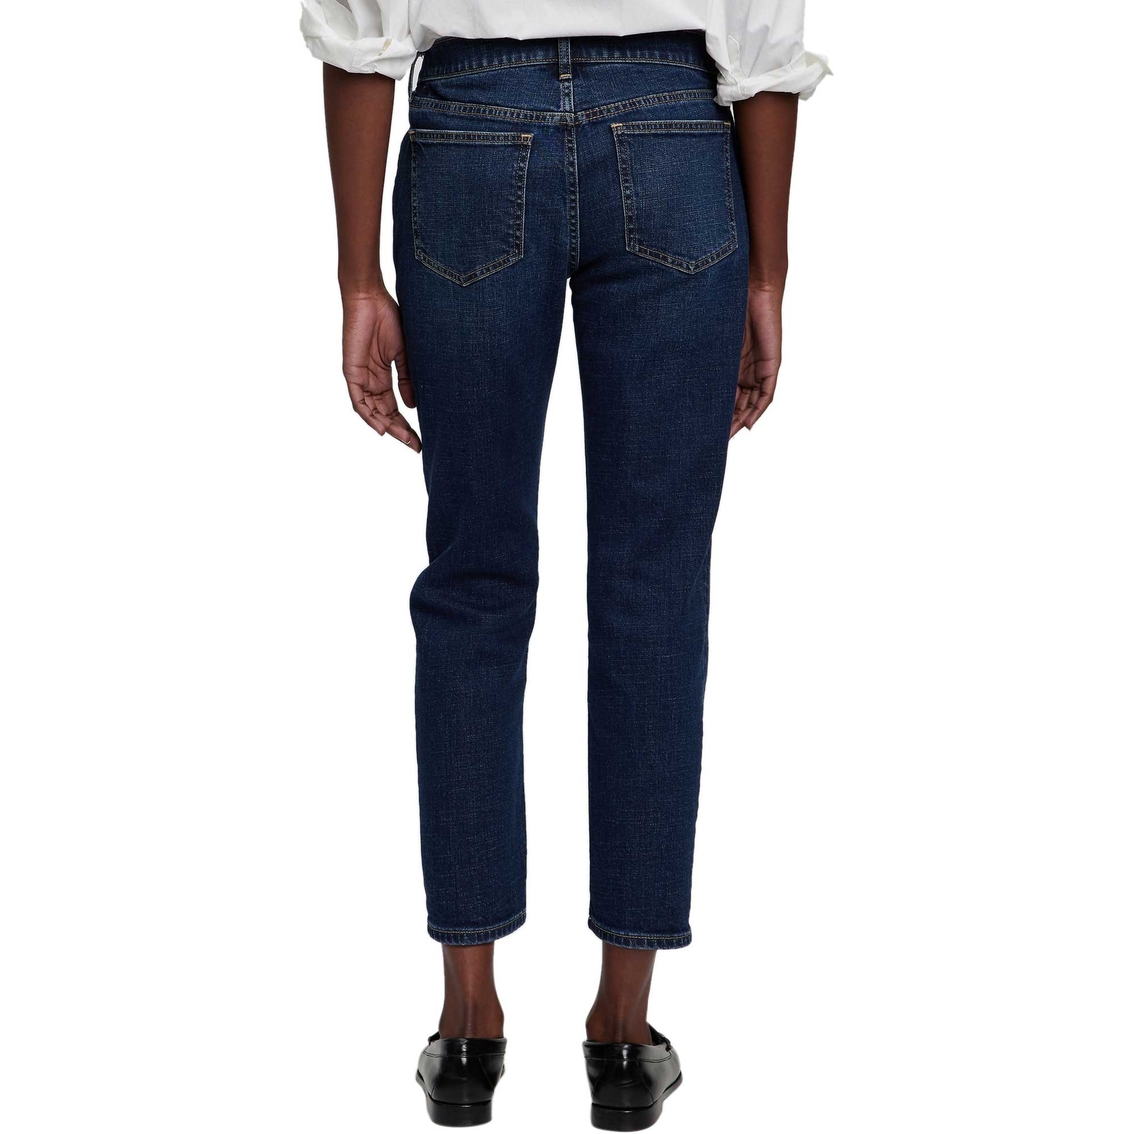 Gap Mid Rise Girlfriend Jeans with Washwell - Image 2 of 3